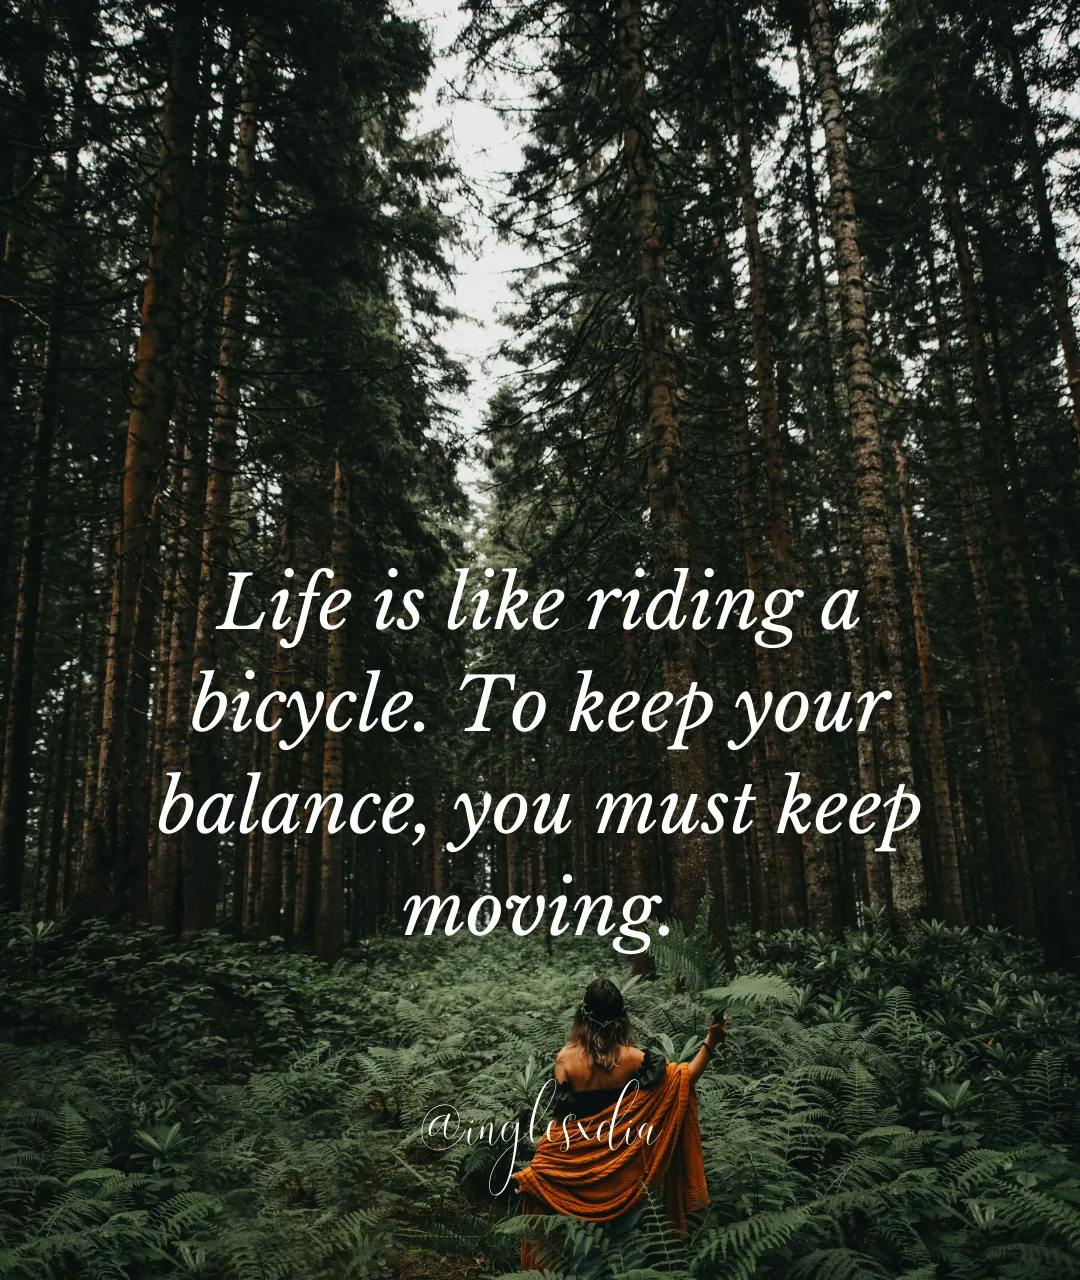 Frases motivadoras en inglés: Life is like riding a bicycle. To keep your balance, you must keep moving.